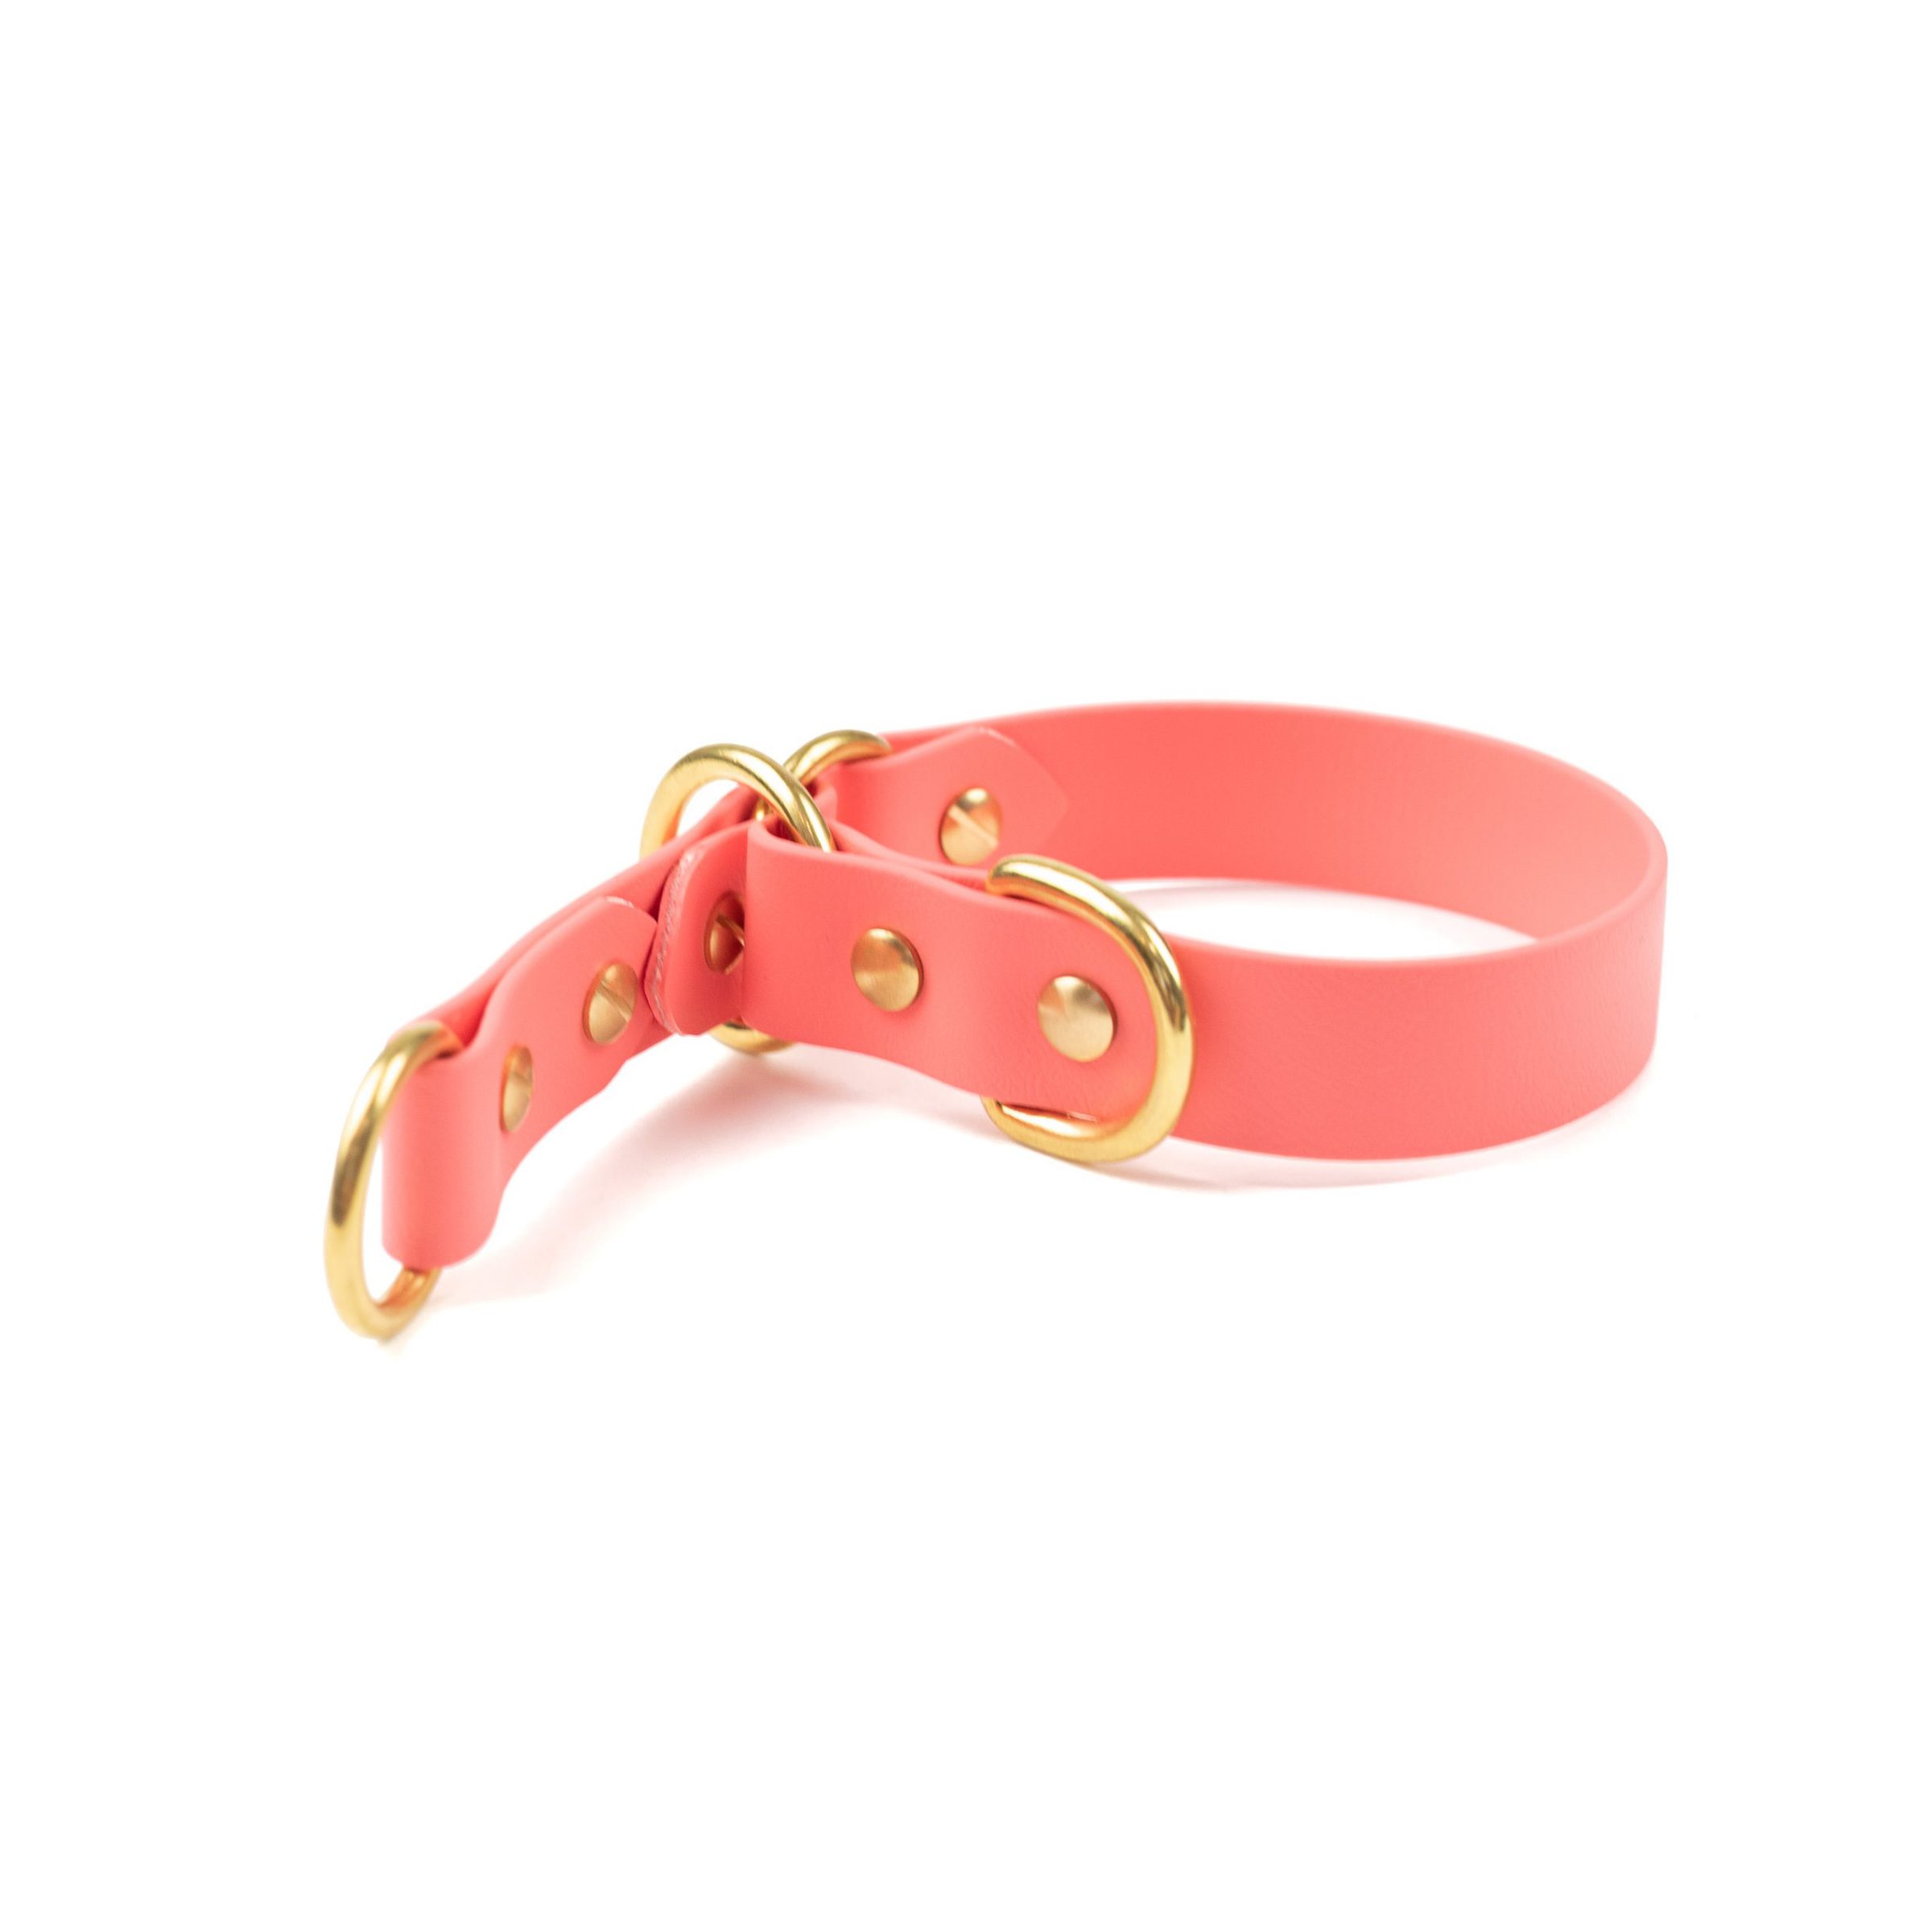 Coral 1" o-ring limited slip collar make from biothane